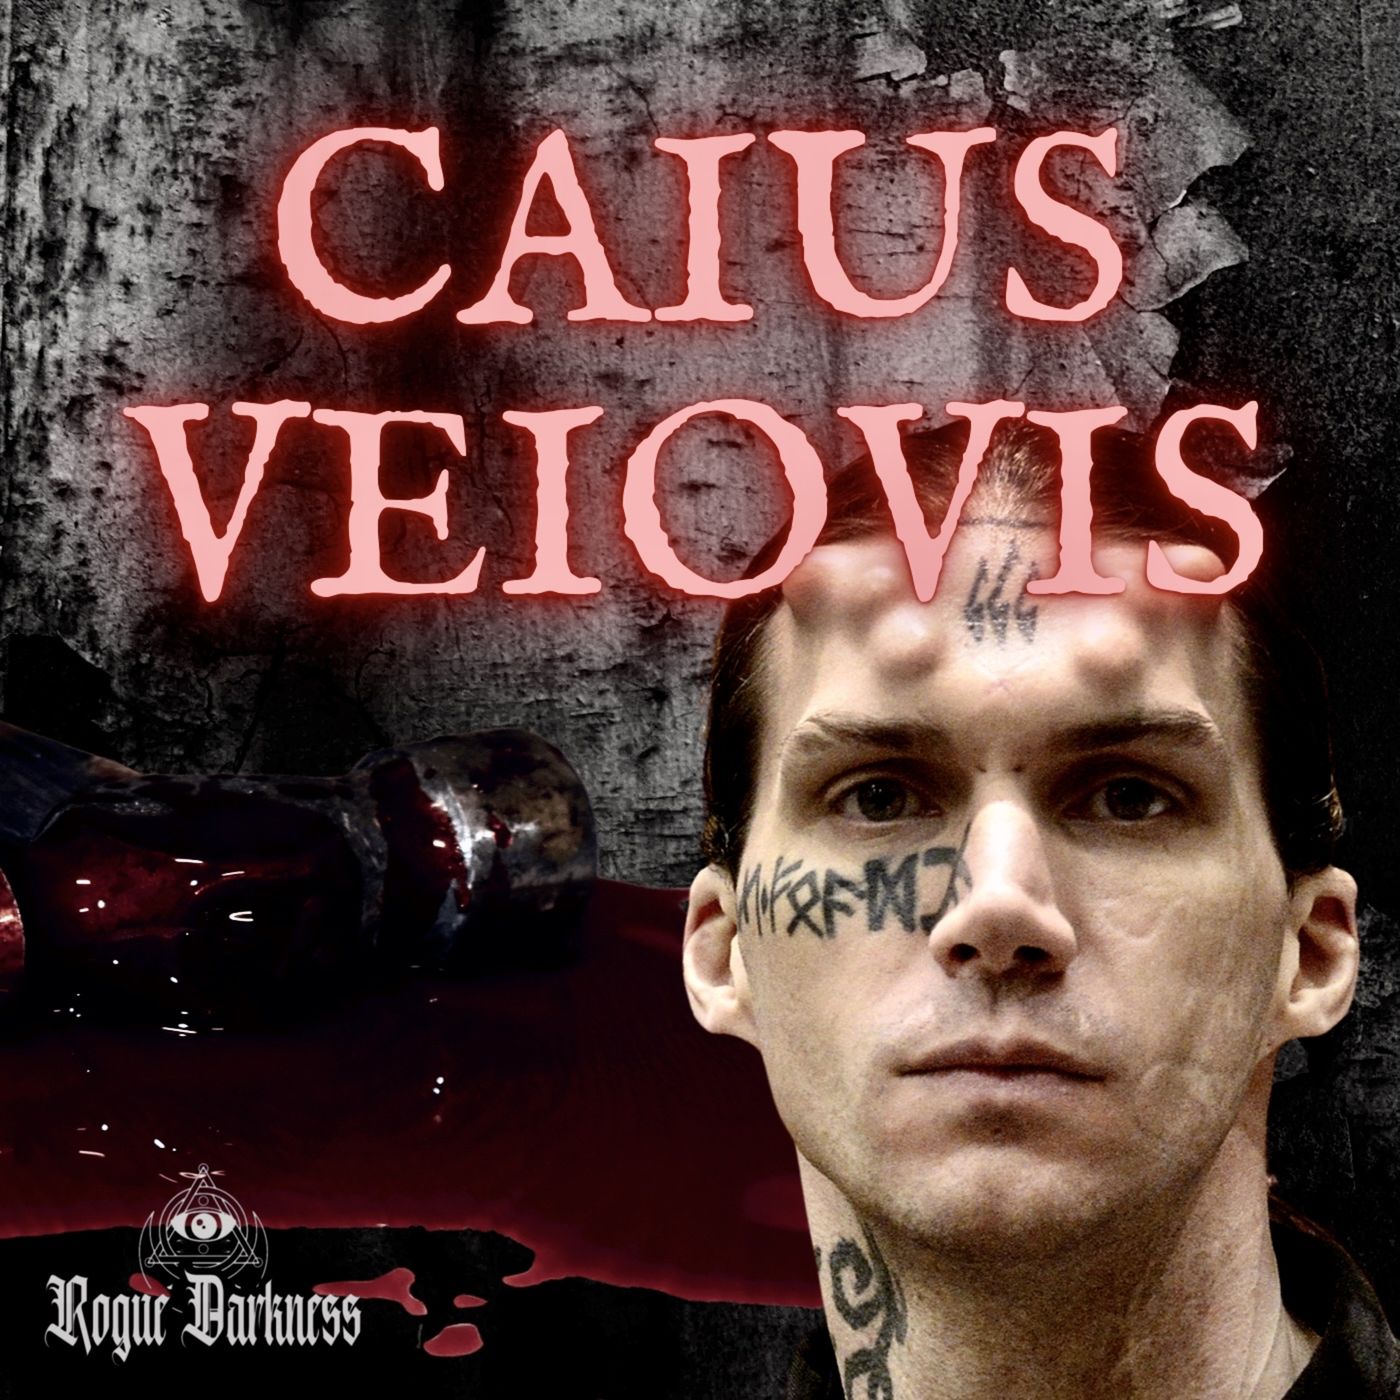 LX: The Conflicted Case of Caius Veiovis